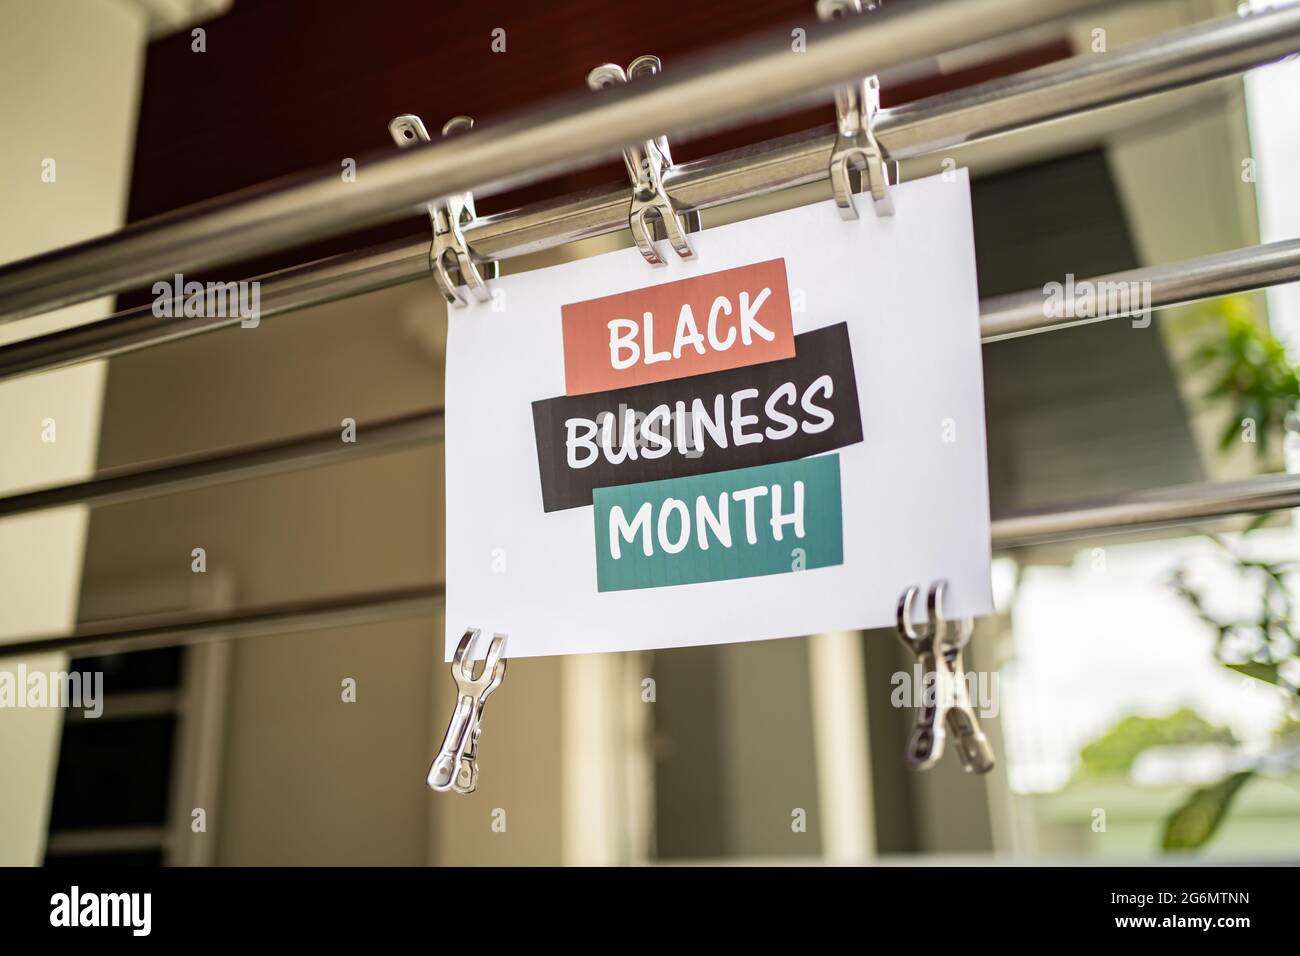 Black business month sign were attached in the public space Stock Photo